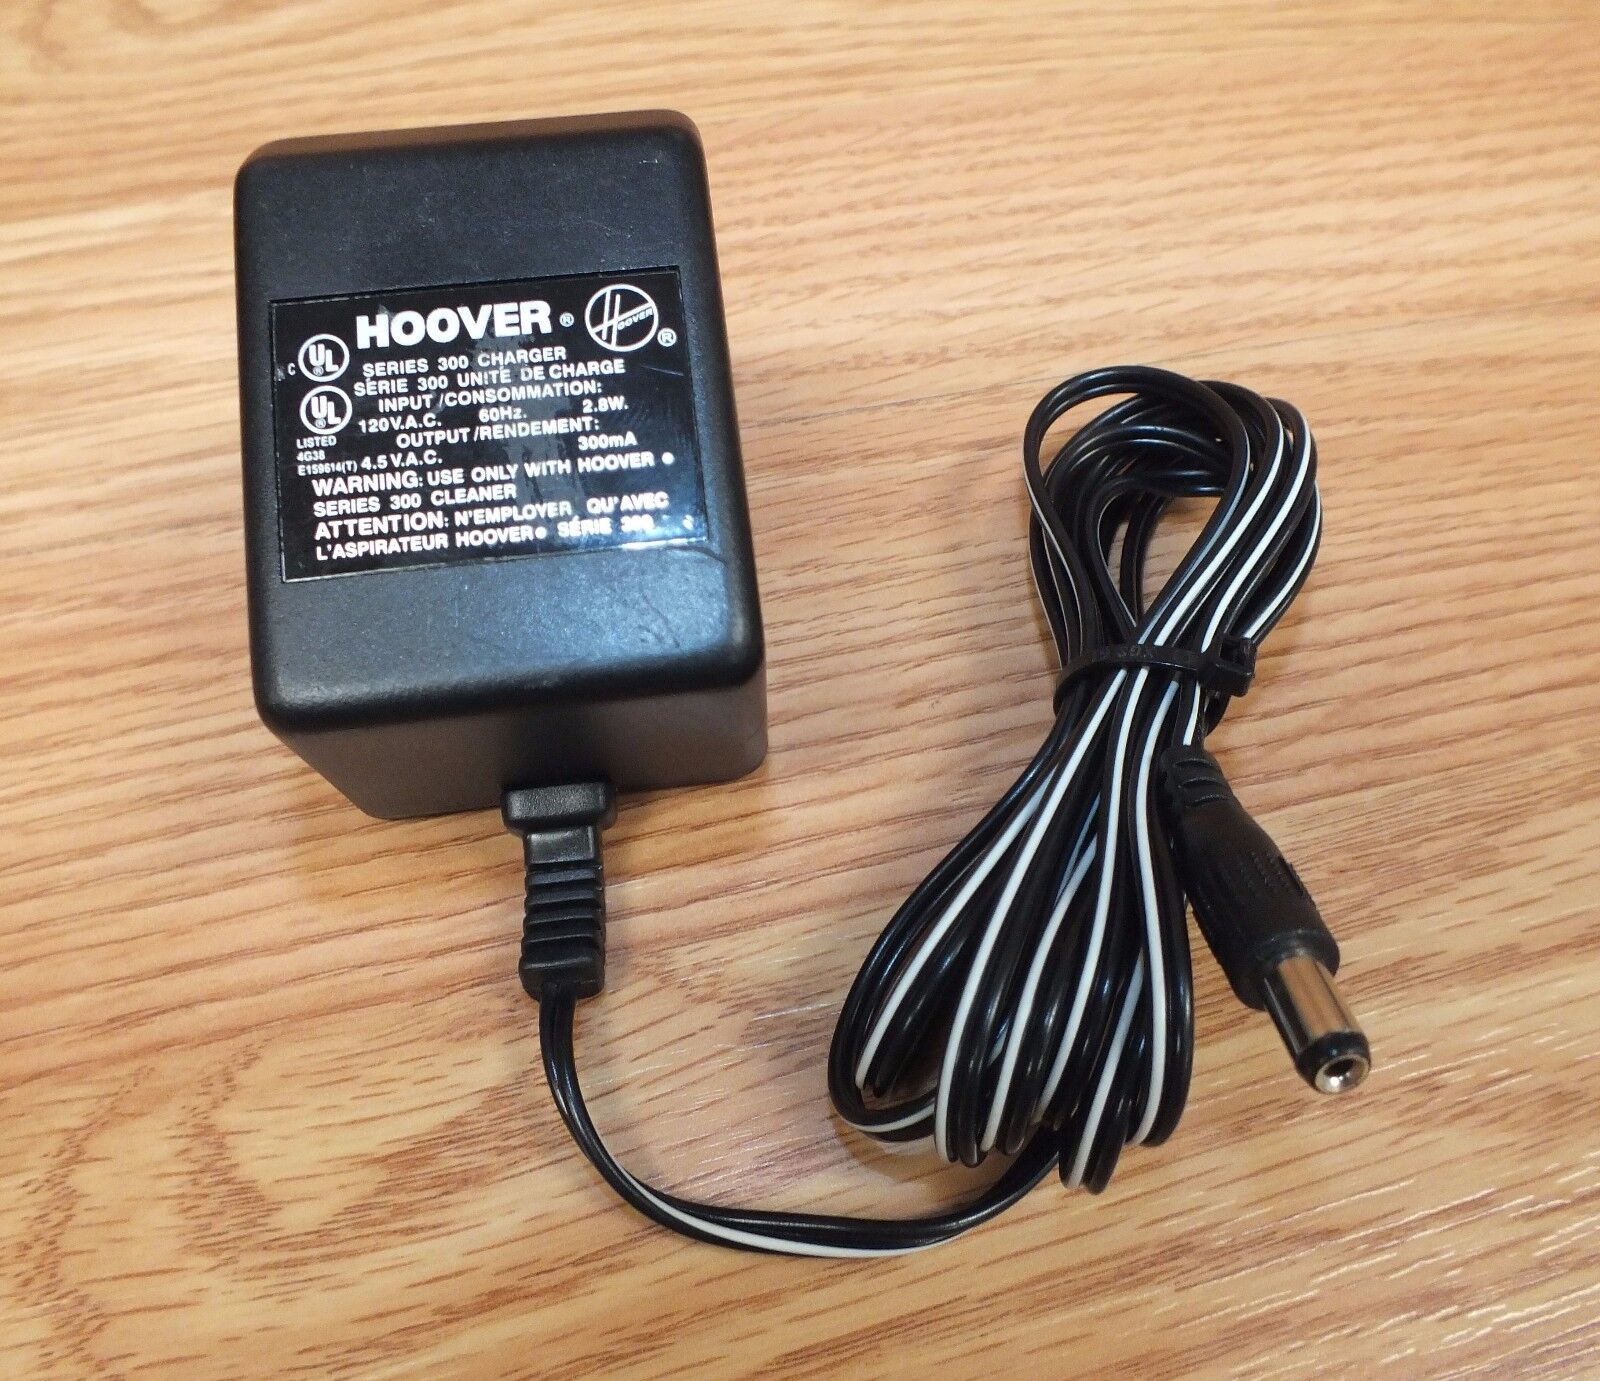 Genuine Hoover (4G38) Black Power Supply Series 300 120V.A.C 60Hz 2.8W Country/Region of Manufacture: United States T